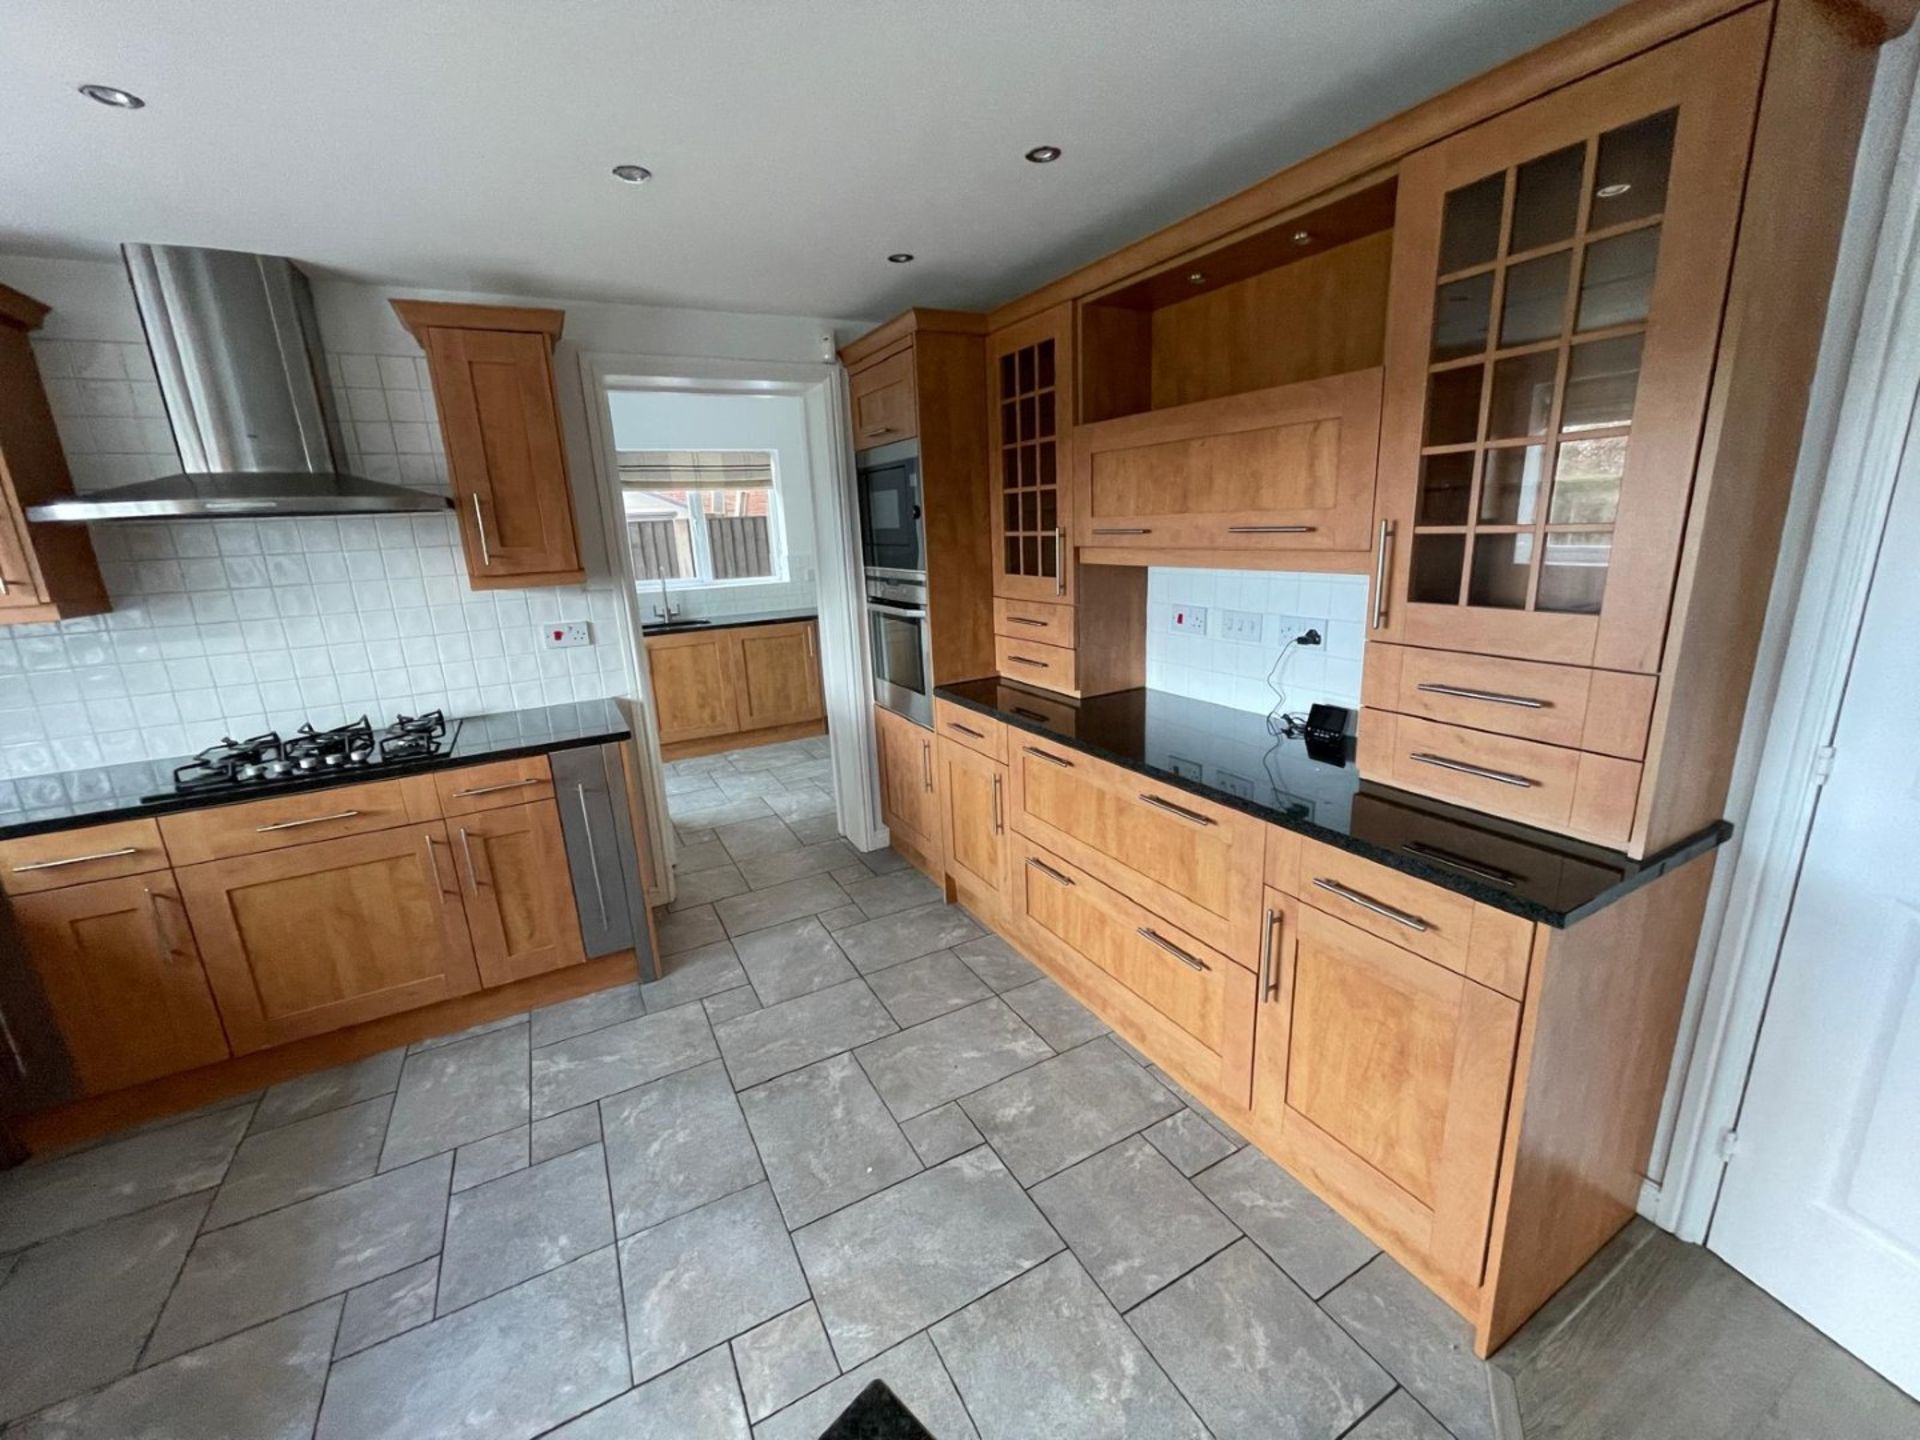 1 x Shaker-style, Feature-rich Fitted Kitchen with Solid Wood Doors, Granite Worktops and Appliances - Image 11 of 111